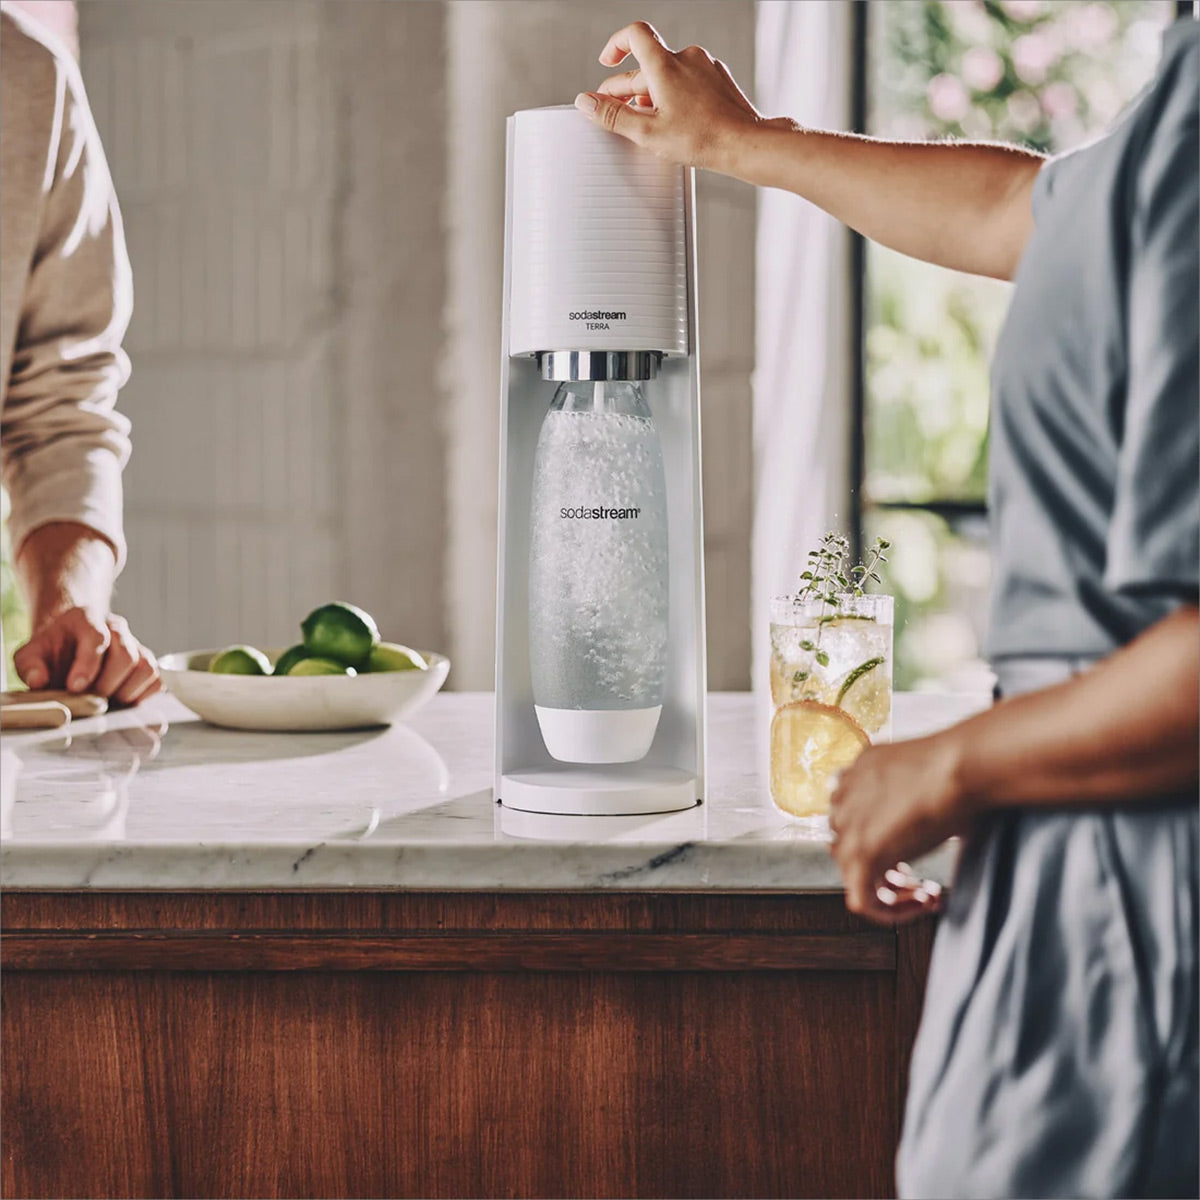 SodaStream Terra Sparkling Water Maker with Dishwasher Safe Bottle and Quick Connect CO2 Cylinder (White)